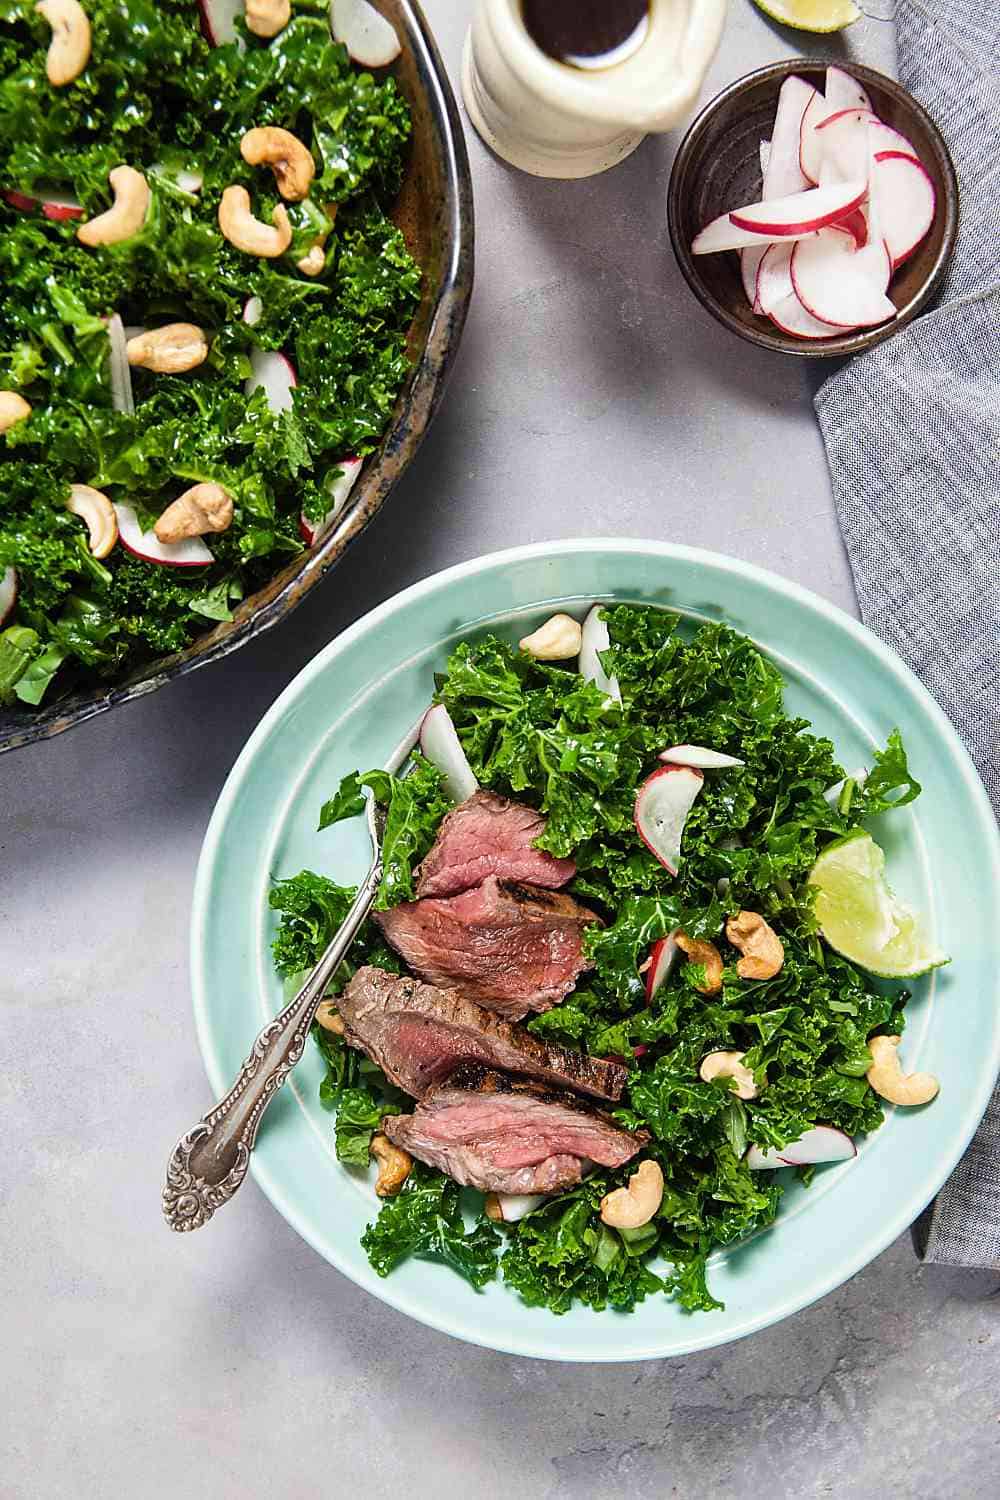 Thai Steak Salad with Kale and Cashews